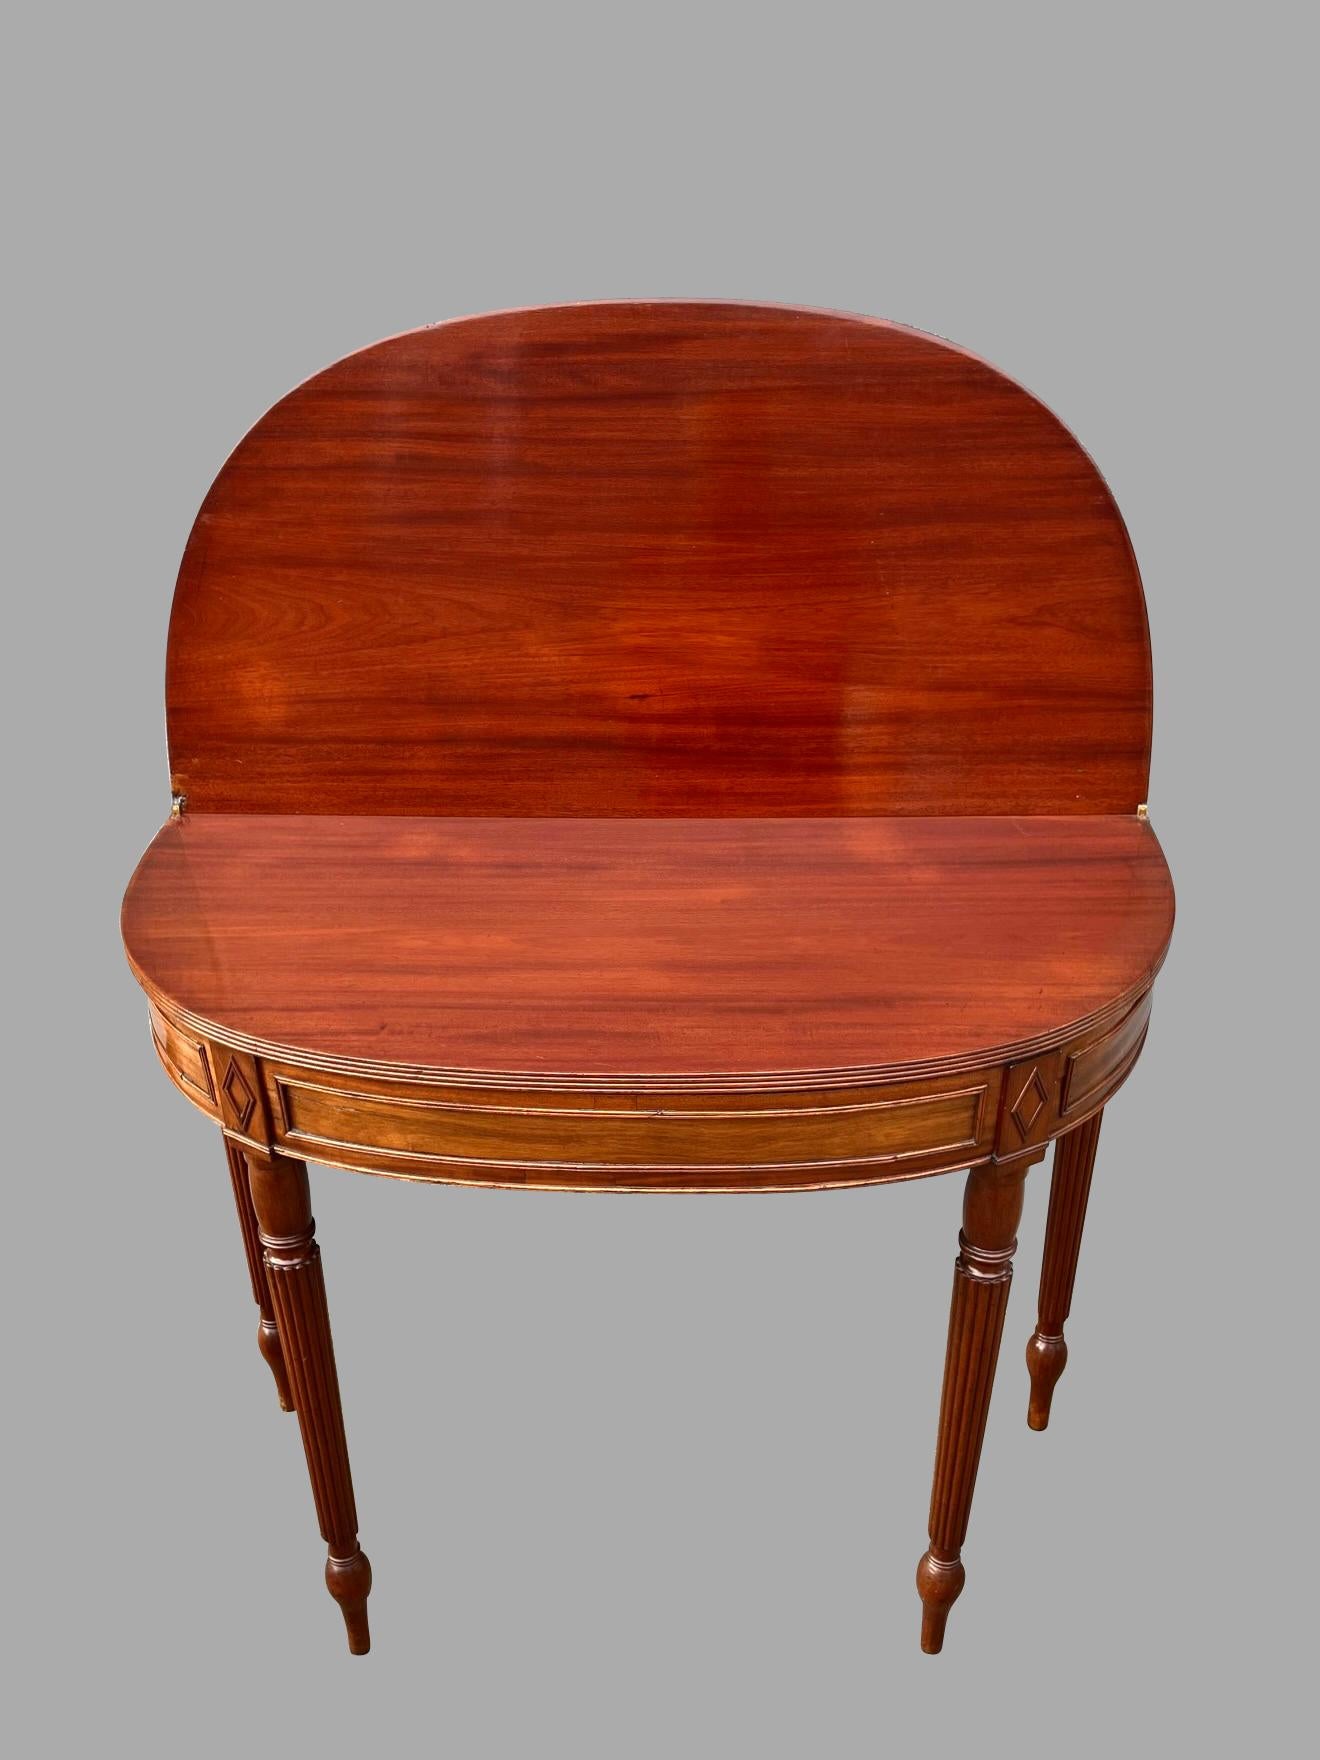 English Regency Period Mahogany Flip Top Game or Tea Table with Reeded Legs For Sale 8